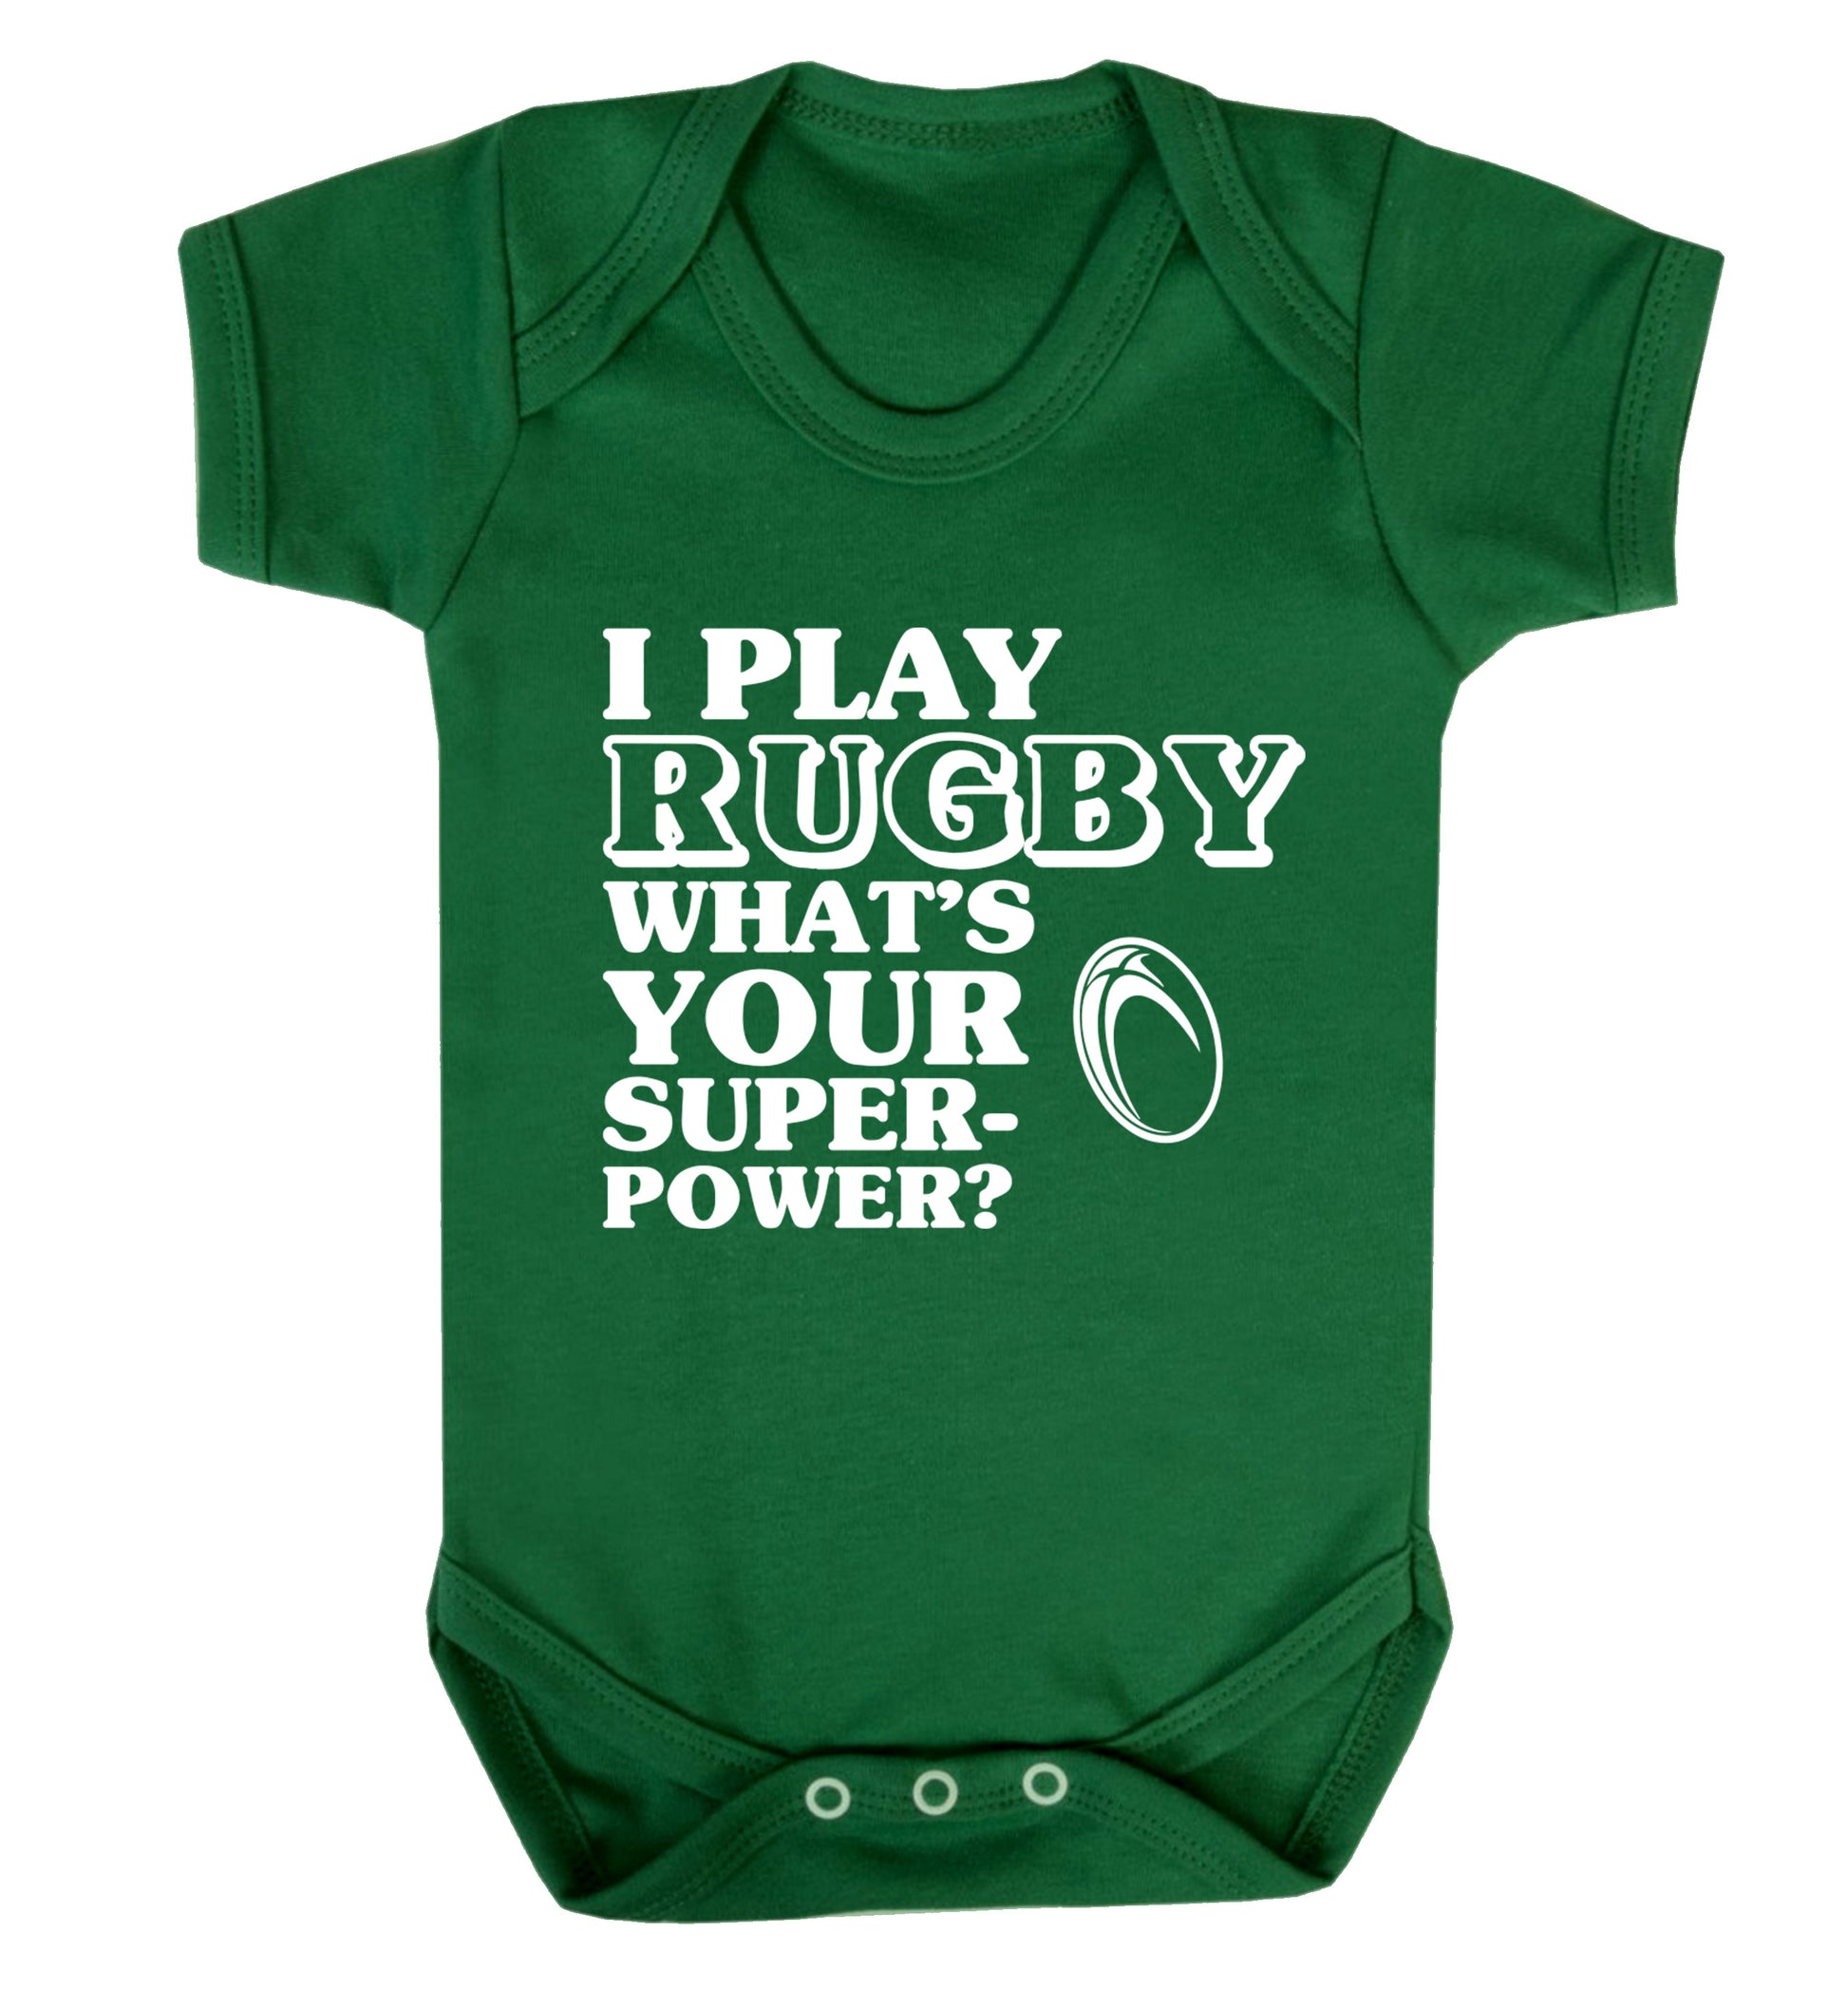 I play rugby what's your superpower? Baby Vest green 18-24 months